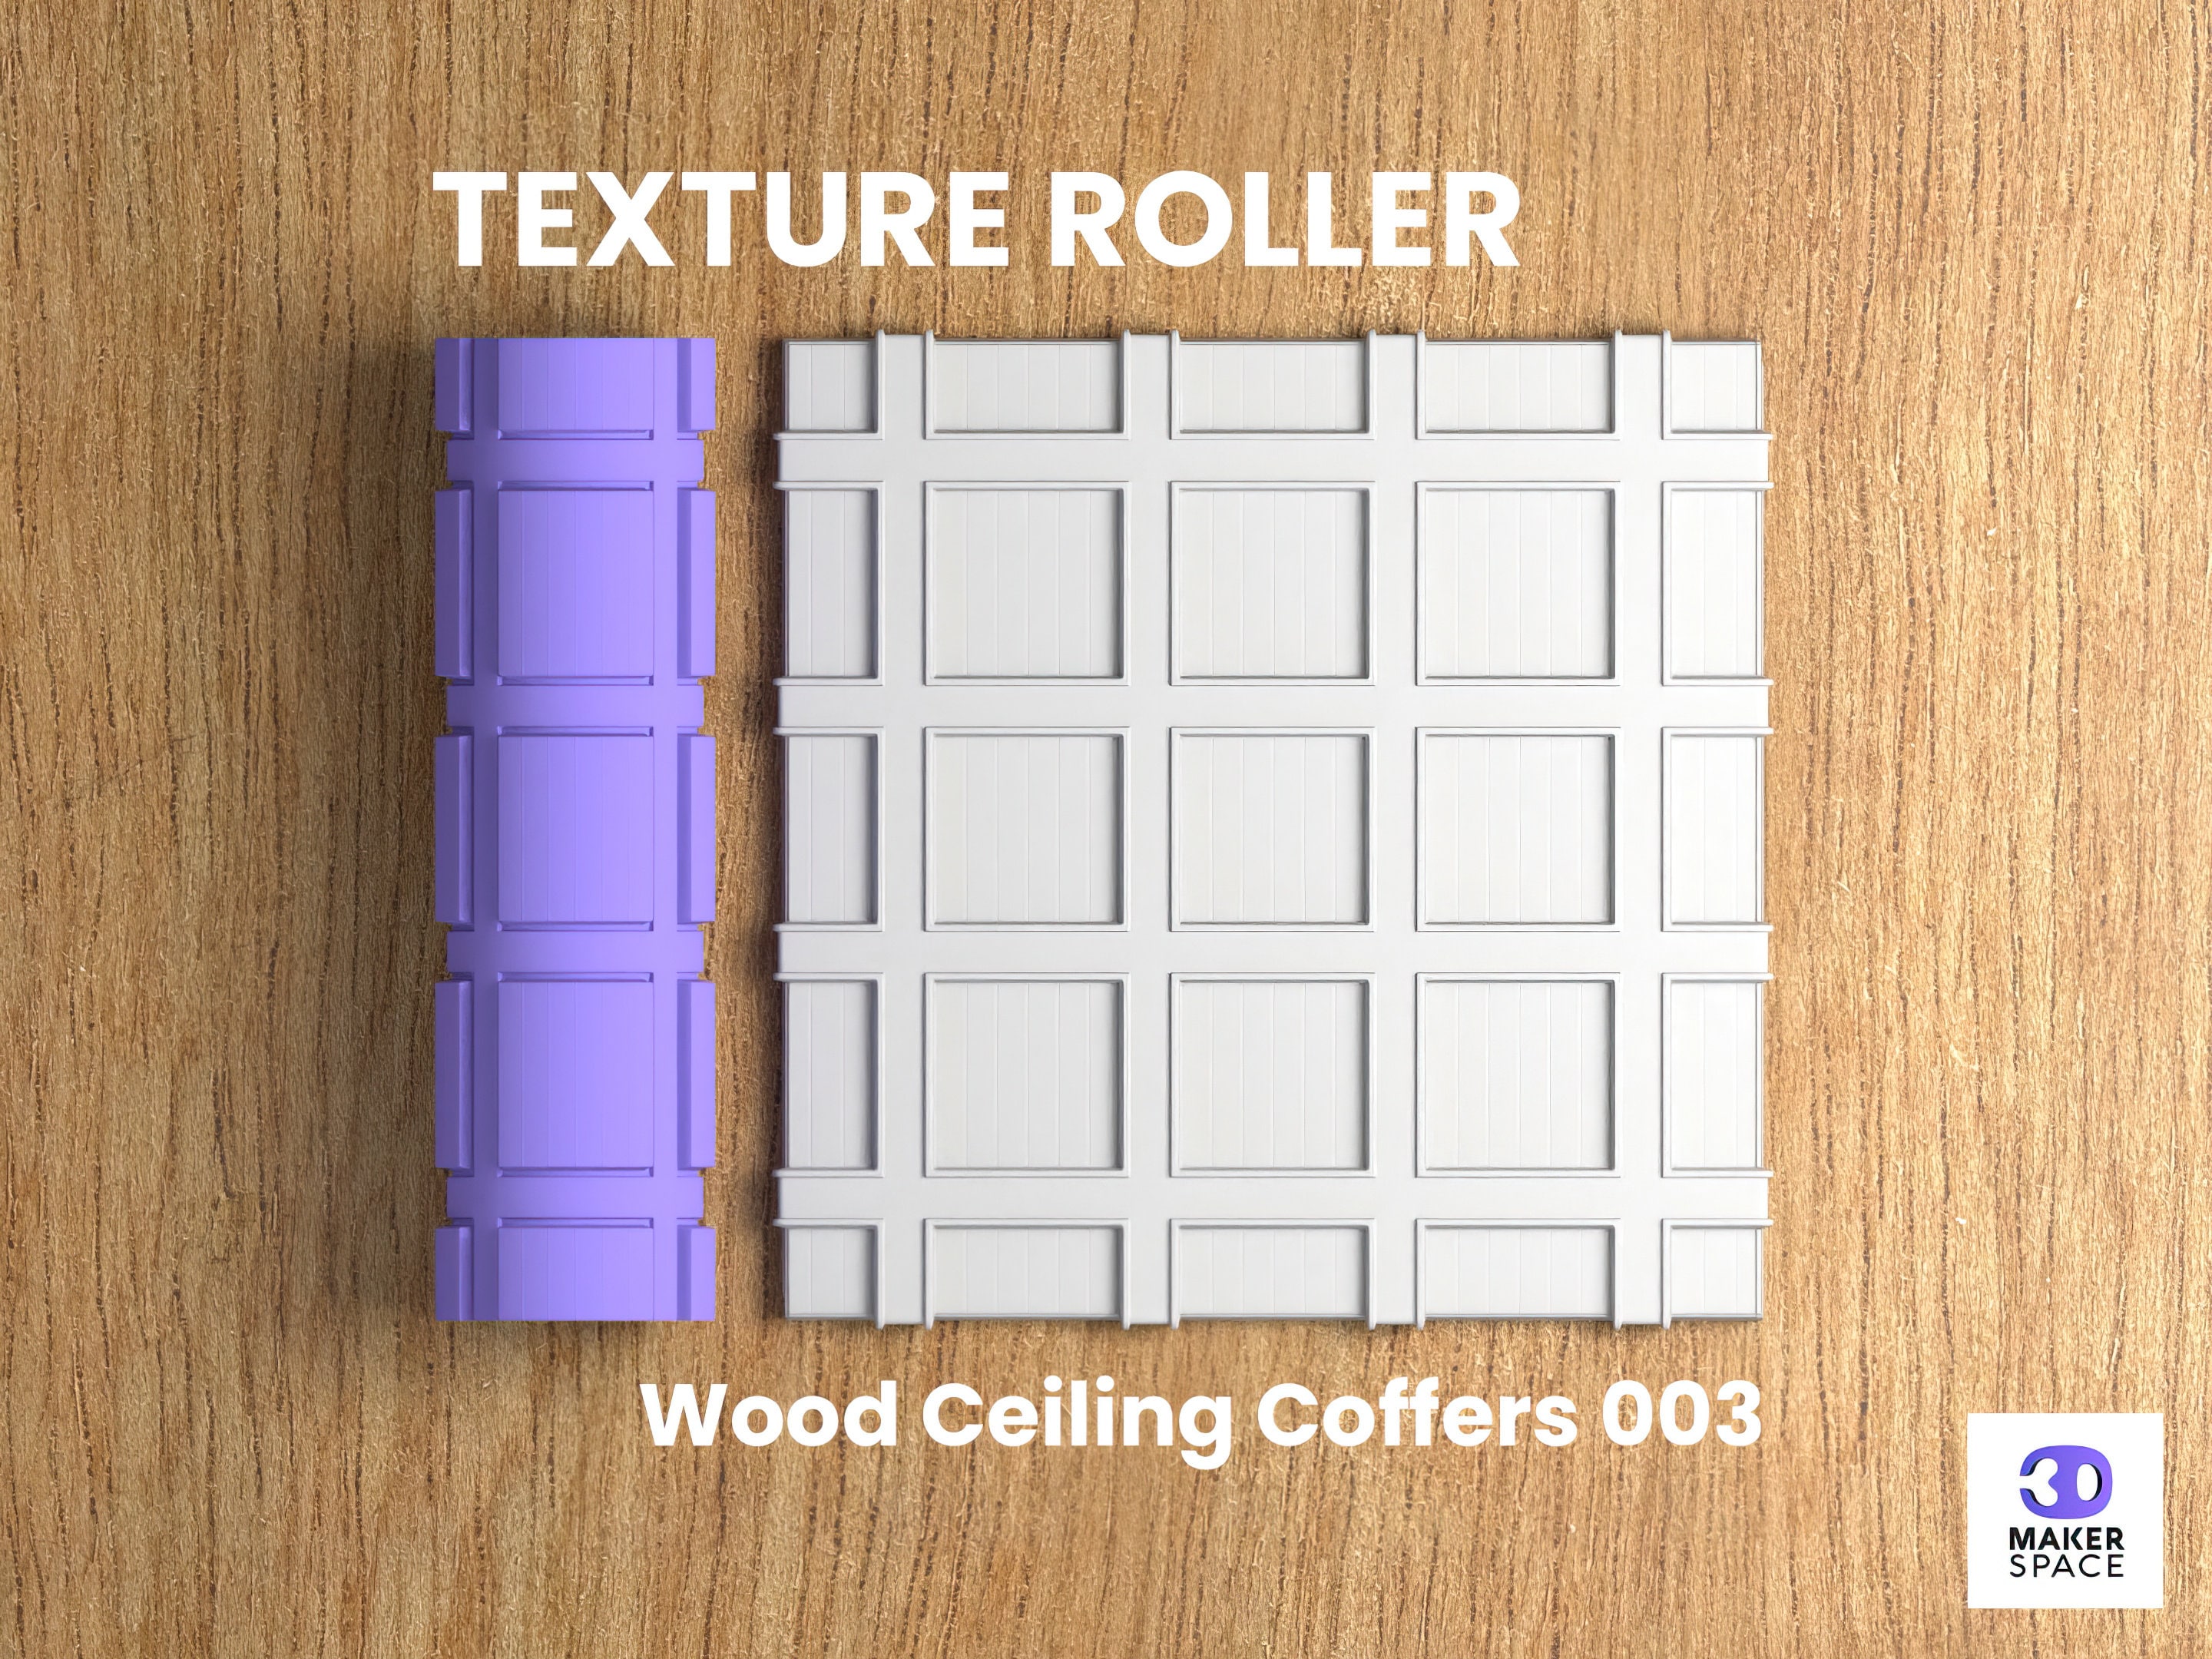 Wood Ceiling Coffers 003 | Polymer Clay Seamless Texture Roller | Digital  STL File